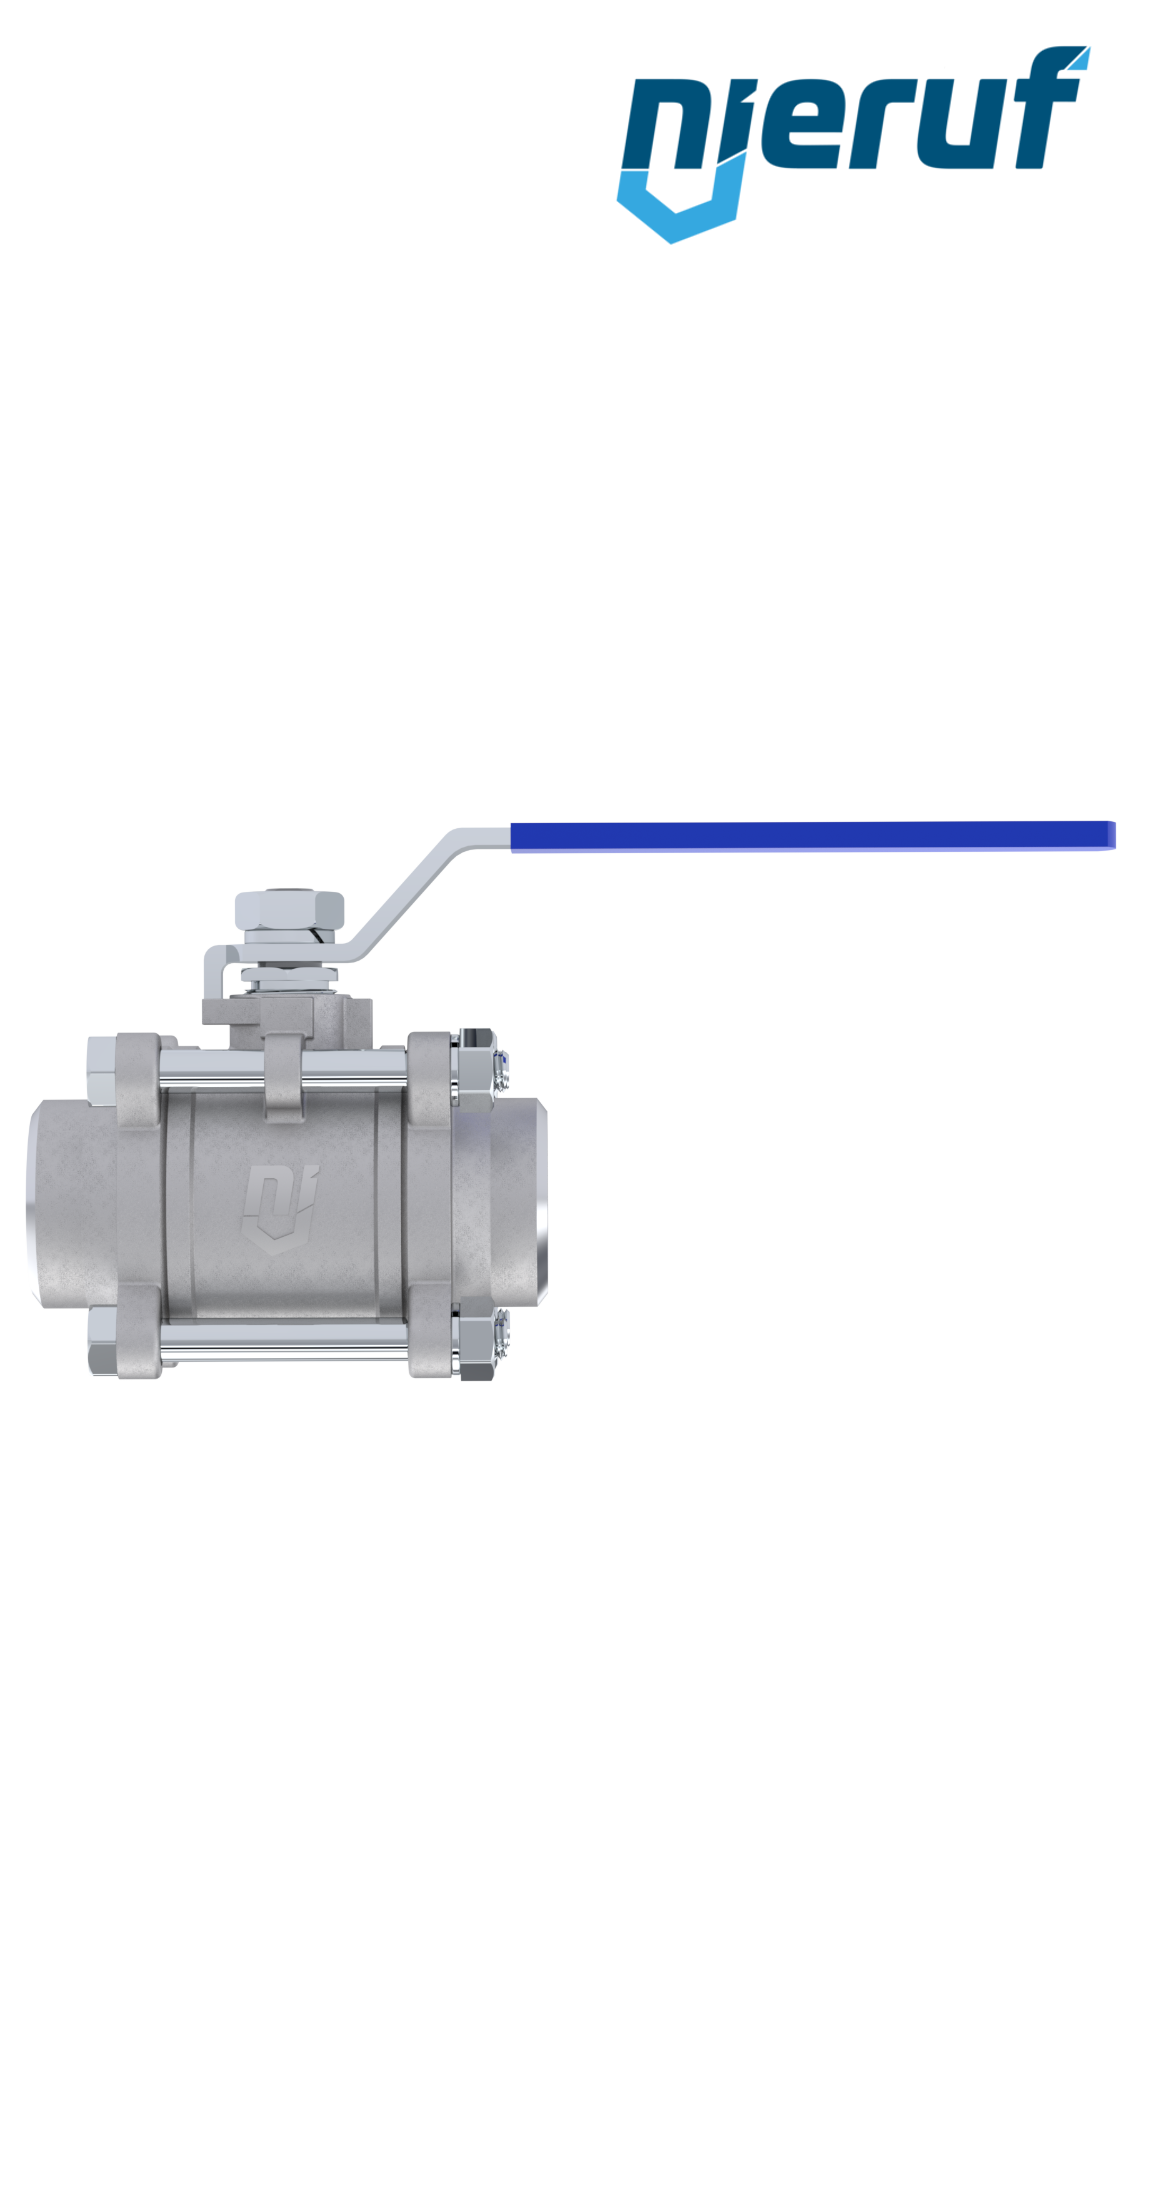 ball valve made of stainless steel DN50 - 2" inch GK04 with butt weld